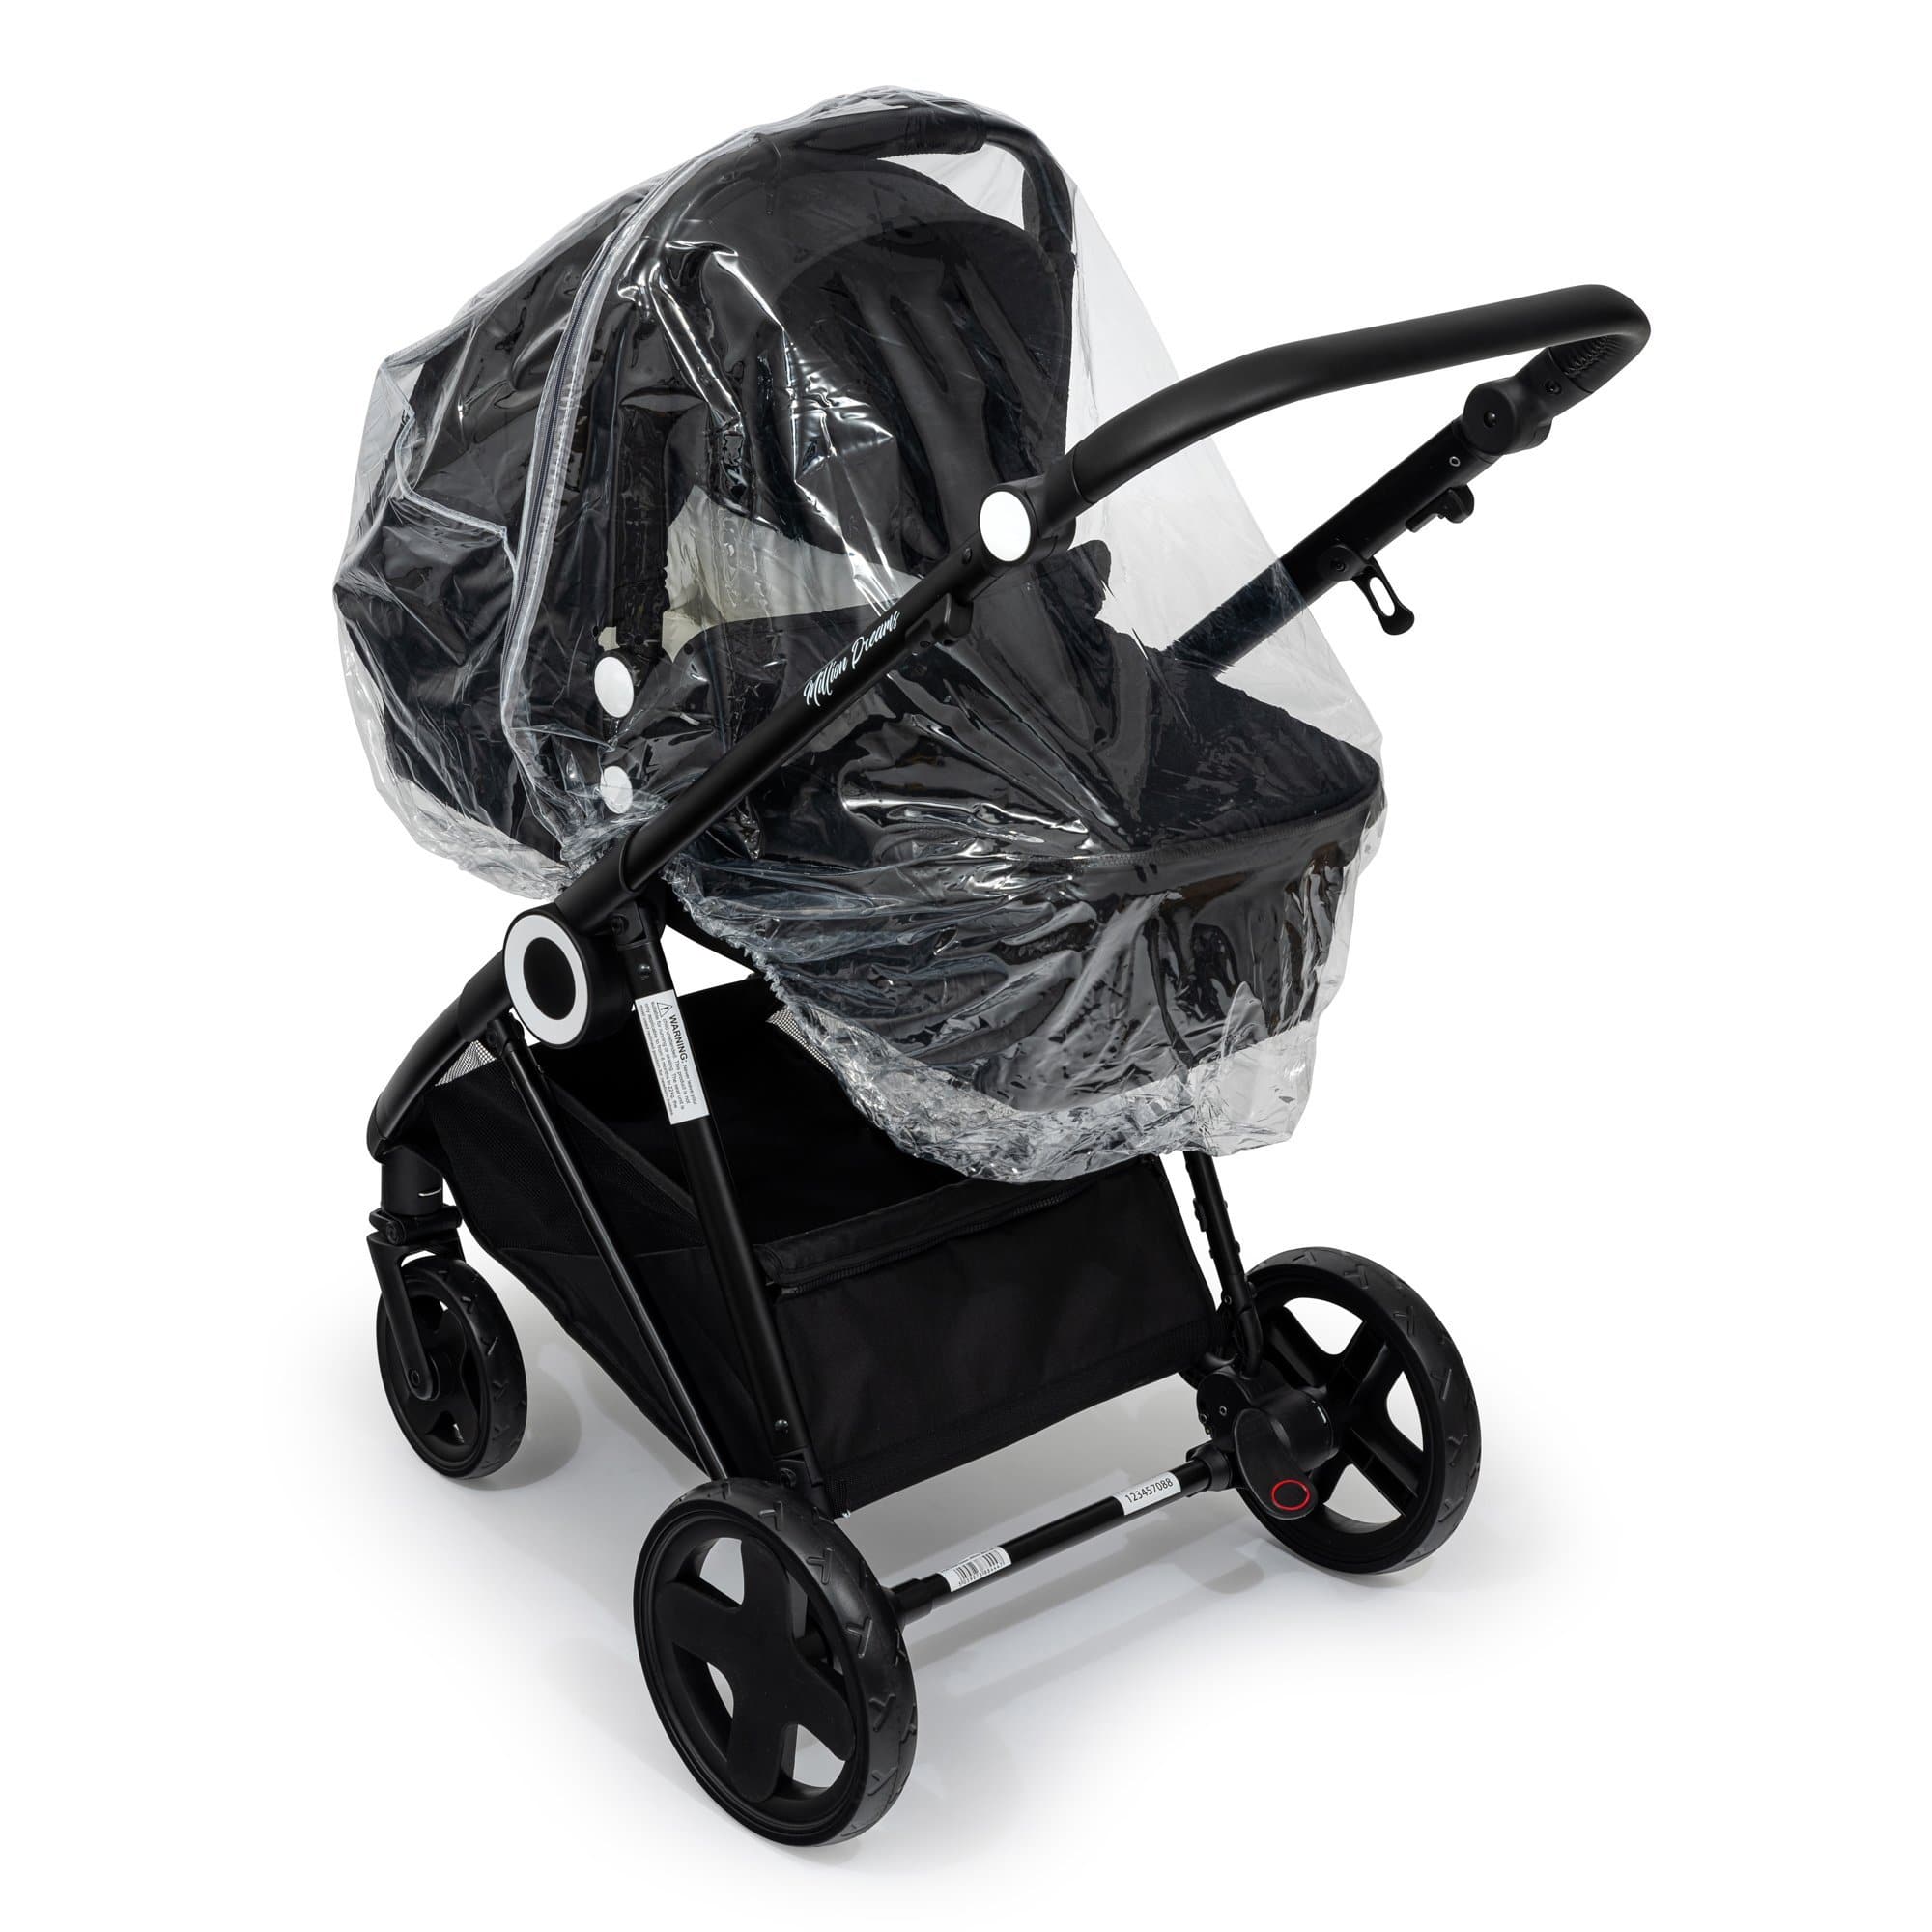 2 in 1 Rain Cover Compatible with Brio - Fits All Models -  | For Your Little One